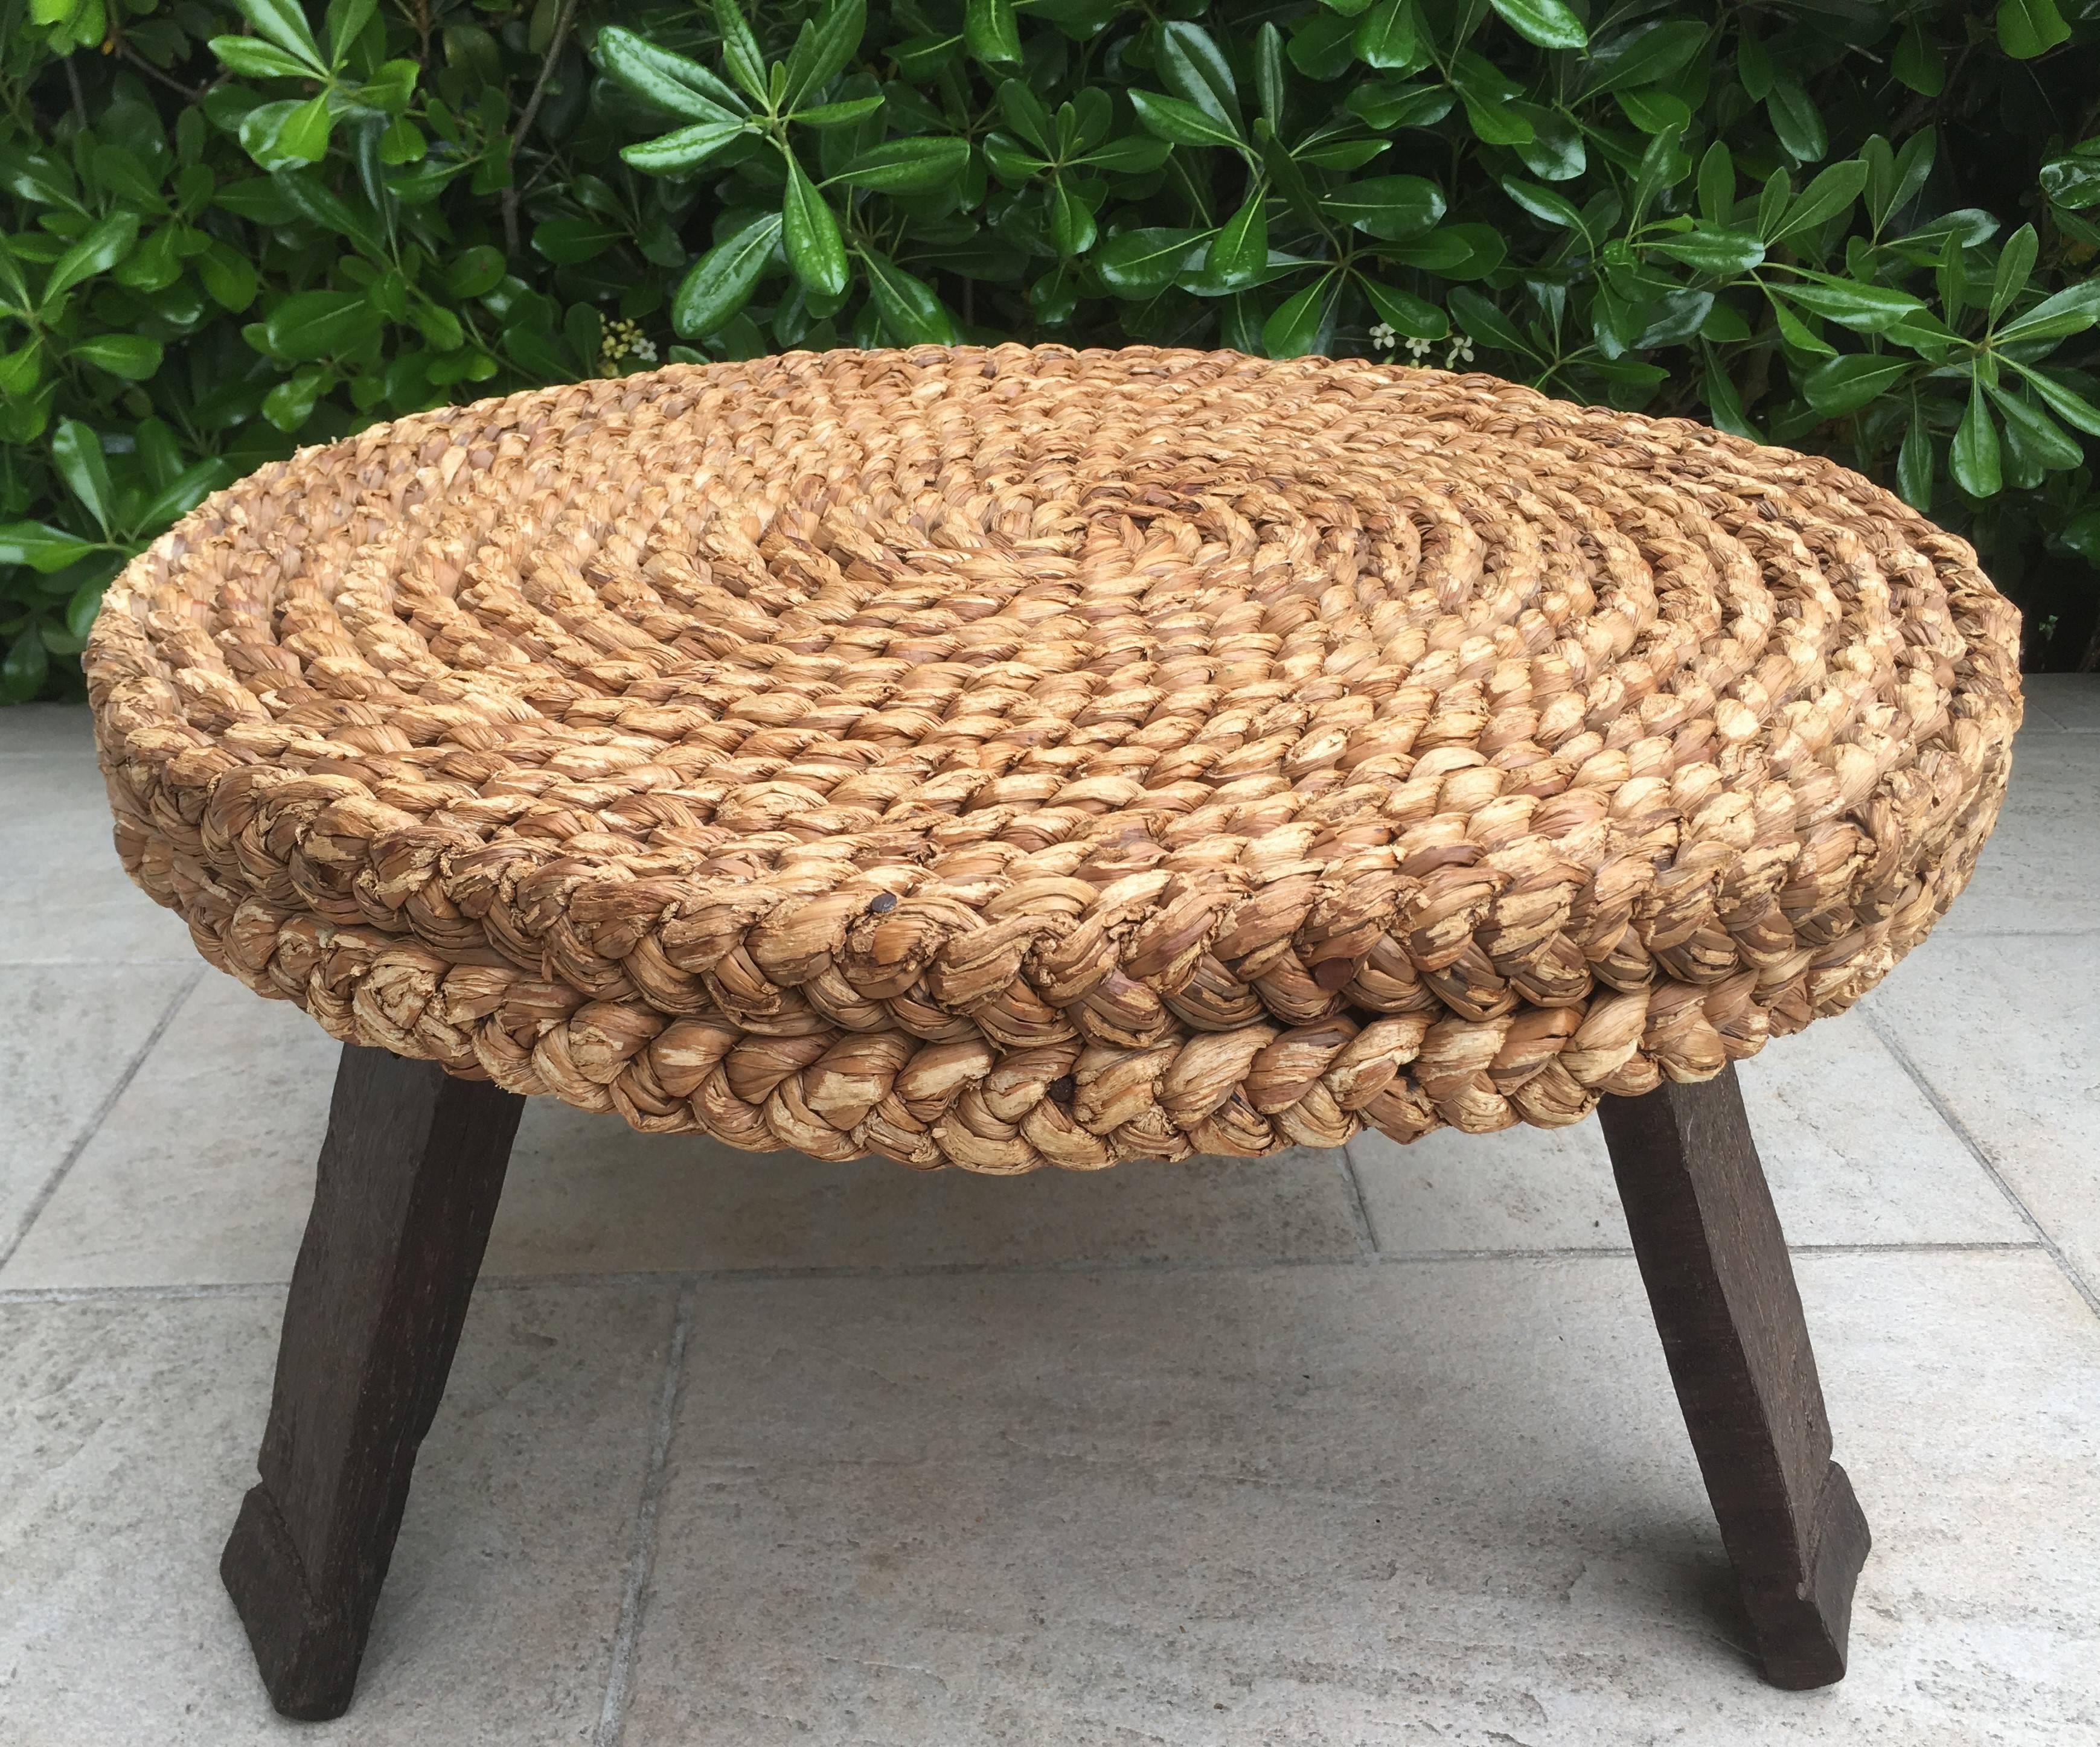 Rare rattan round low table produced in France in 1960s. It comes from a French Riviera house and is attributed to Audoux-Minet
In very good original condition with minor wear to the rattan and minor default to the oak.
A pair of rattan stools based